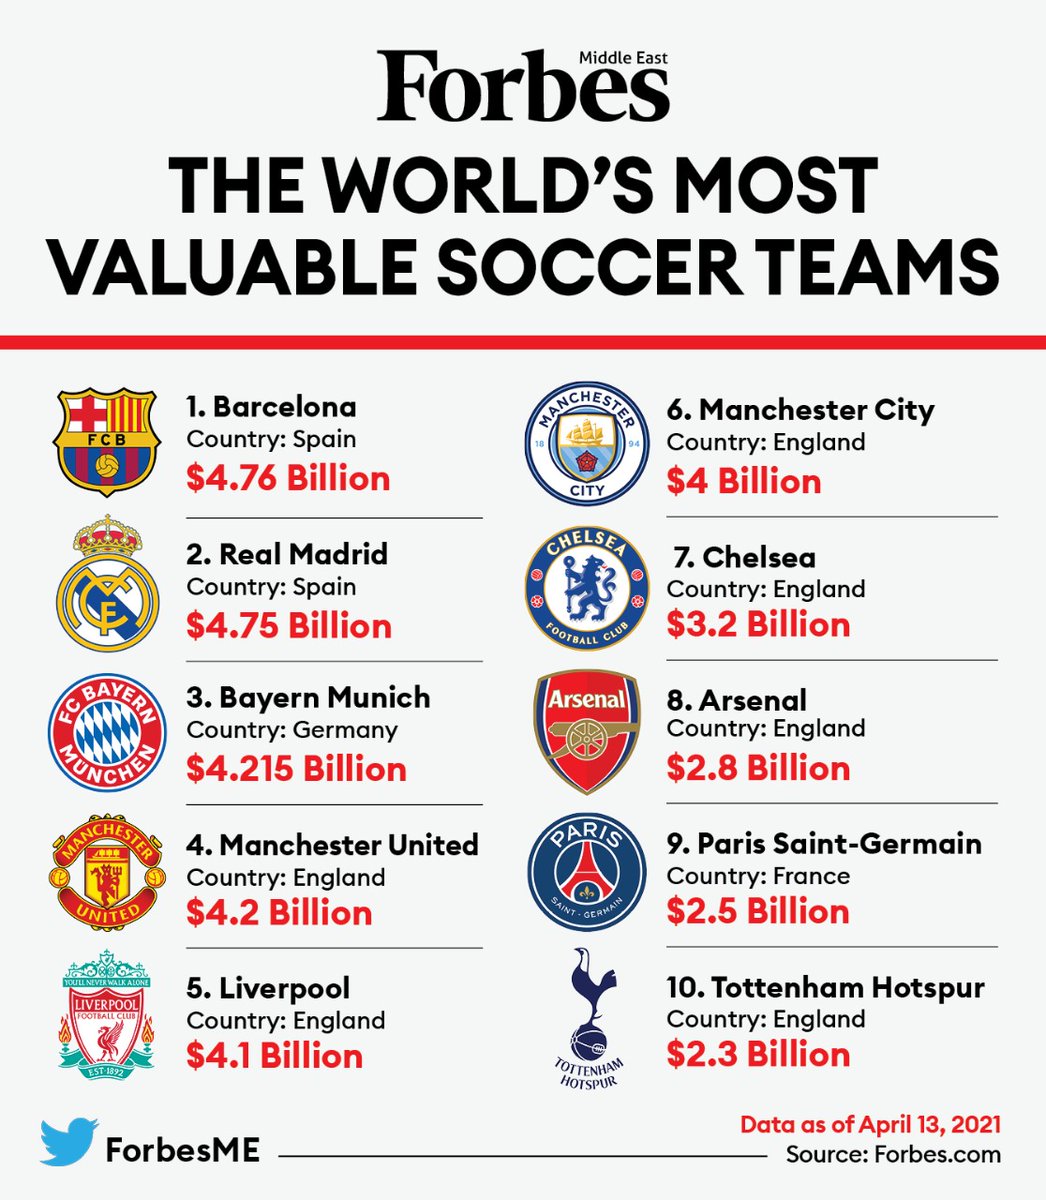 Arsenal on the Forbes Soccer Team Valuations List